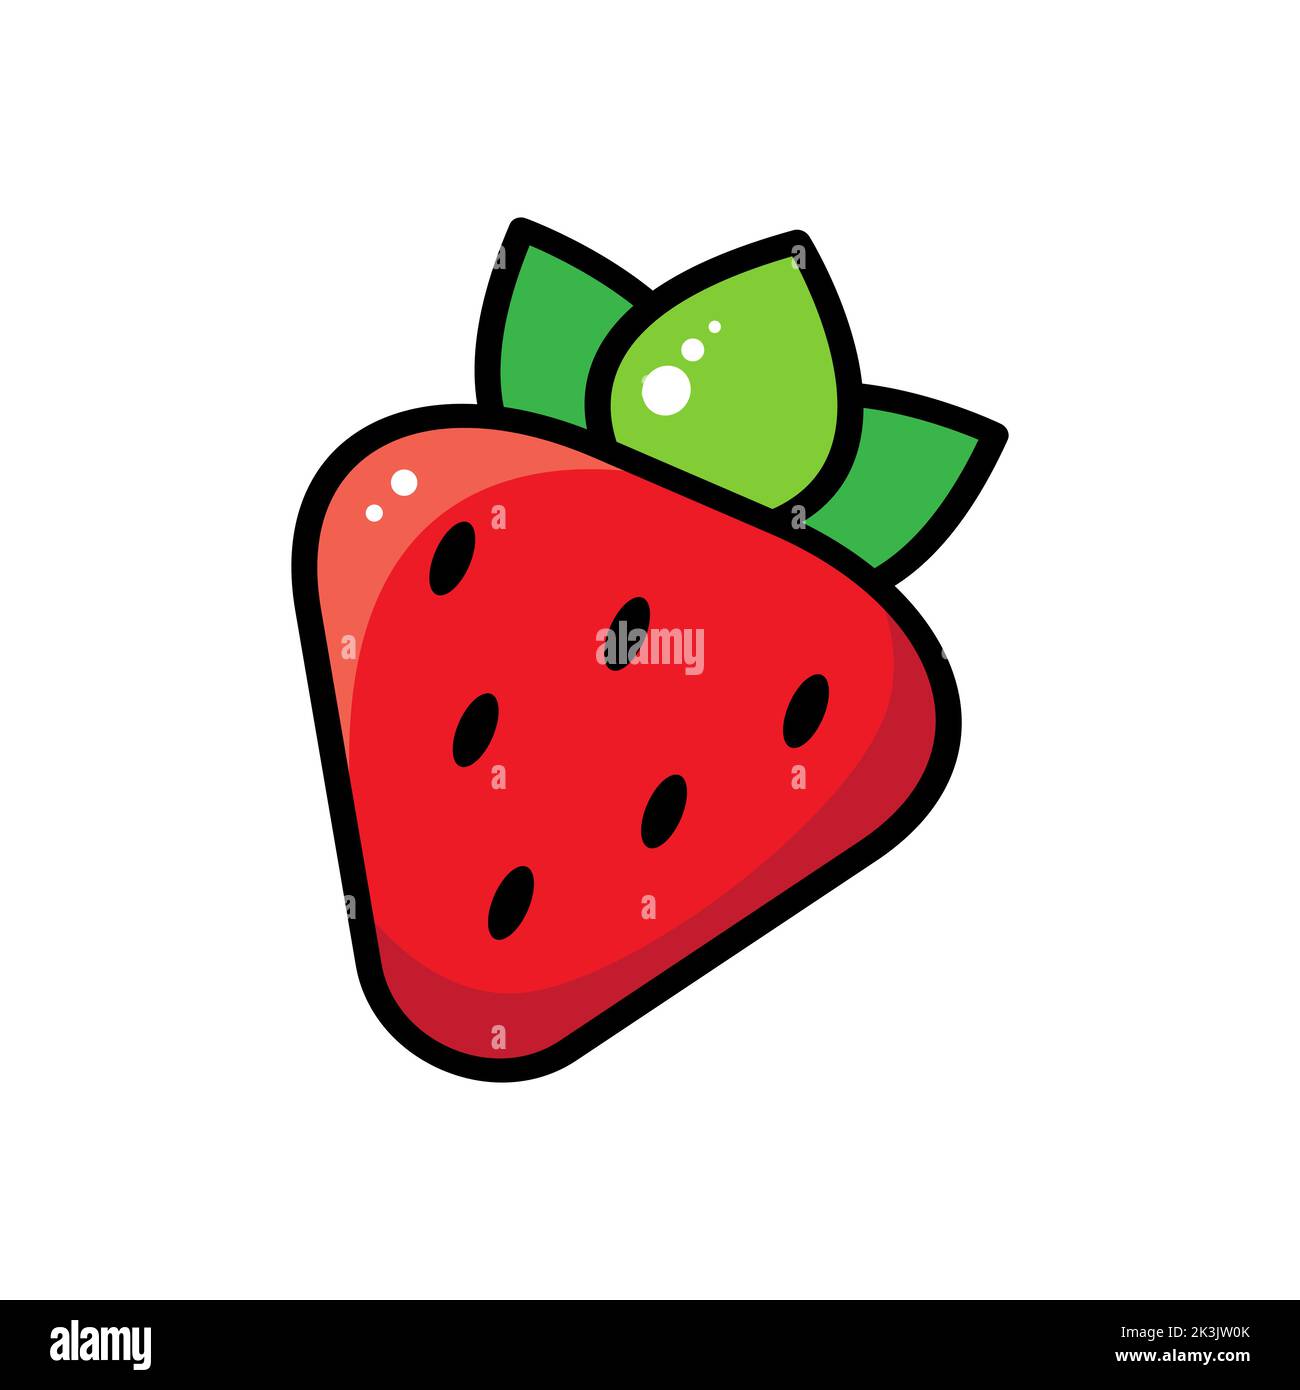 Cartoon vector illustration of a red strawberry with a curly tail. On a white background. Stock Vector